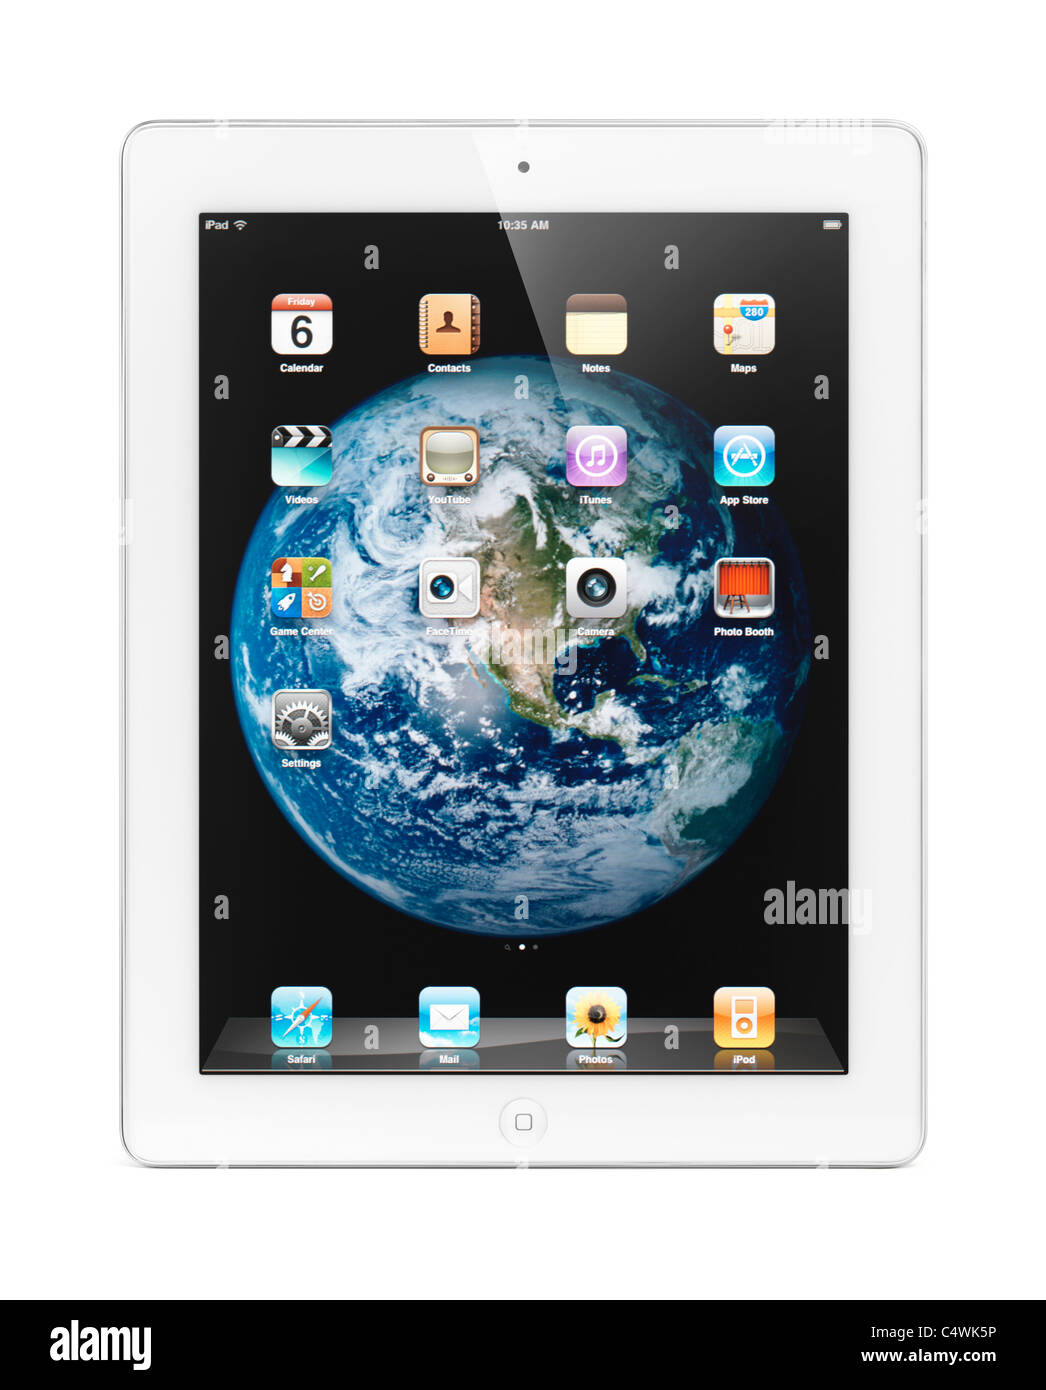 White Apple iPad 2 tablet computer with Earth globe desktop on its display. Isolated with clipping path on white background. Stock Photo